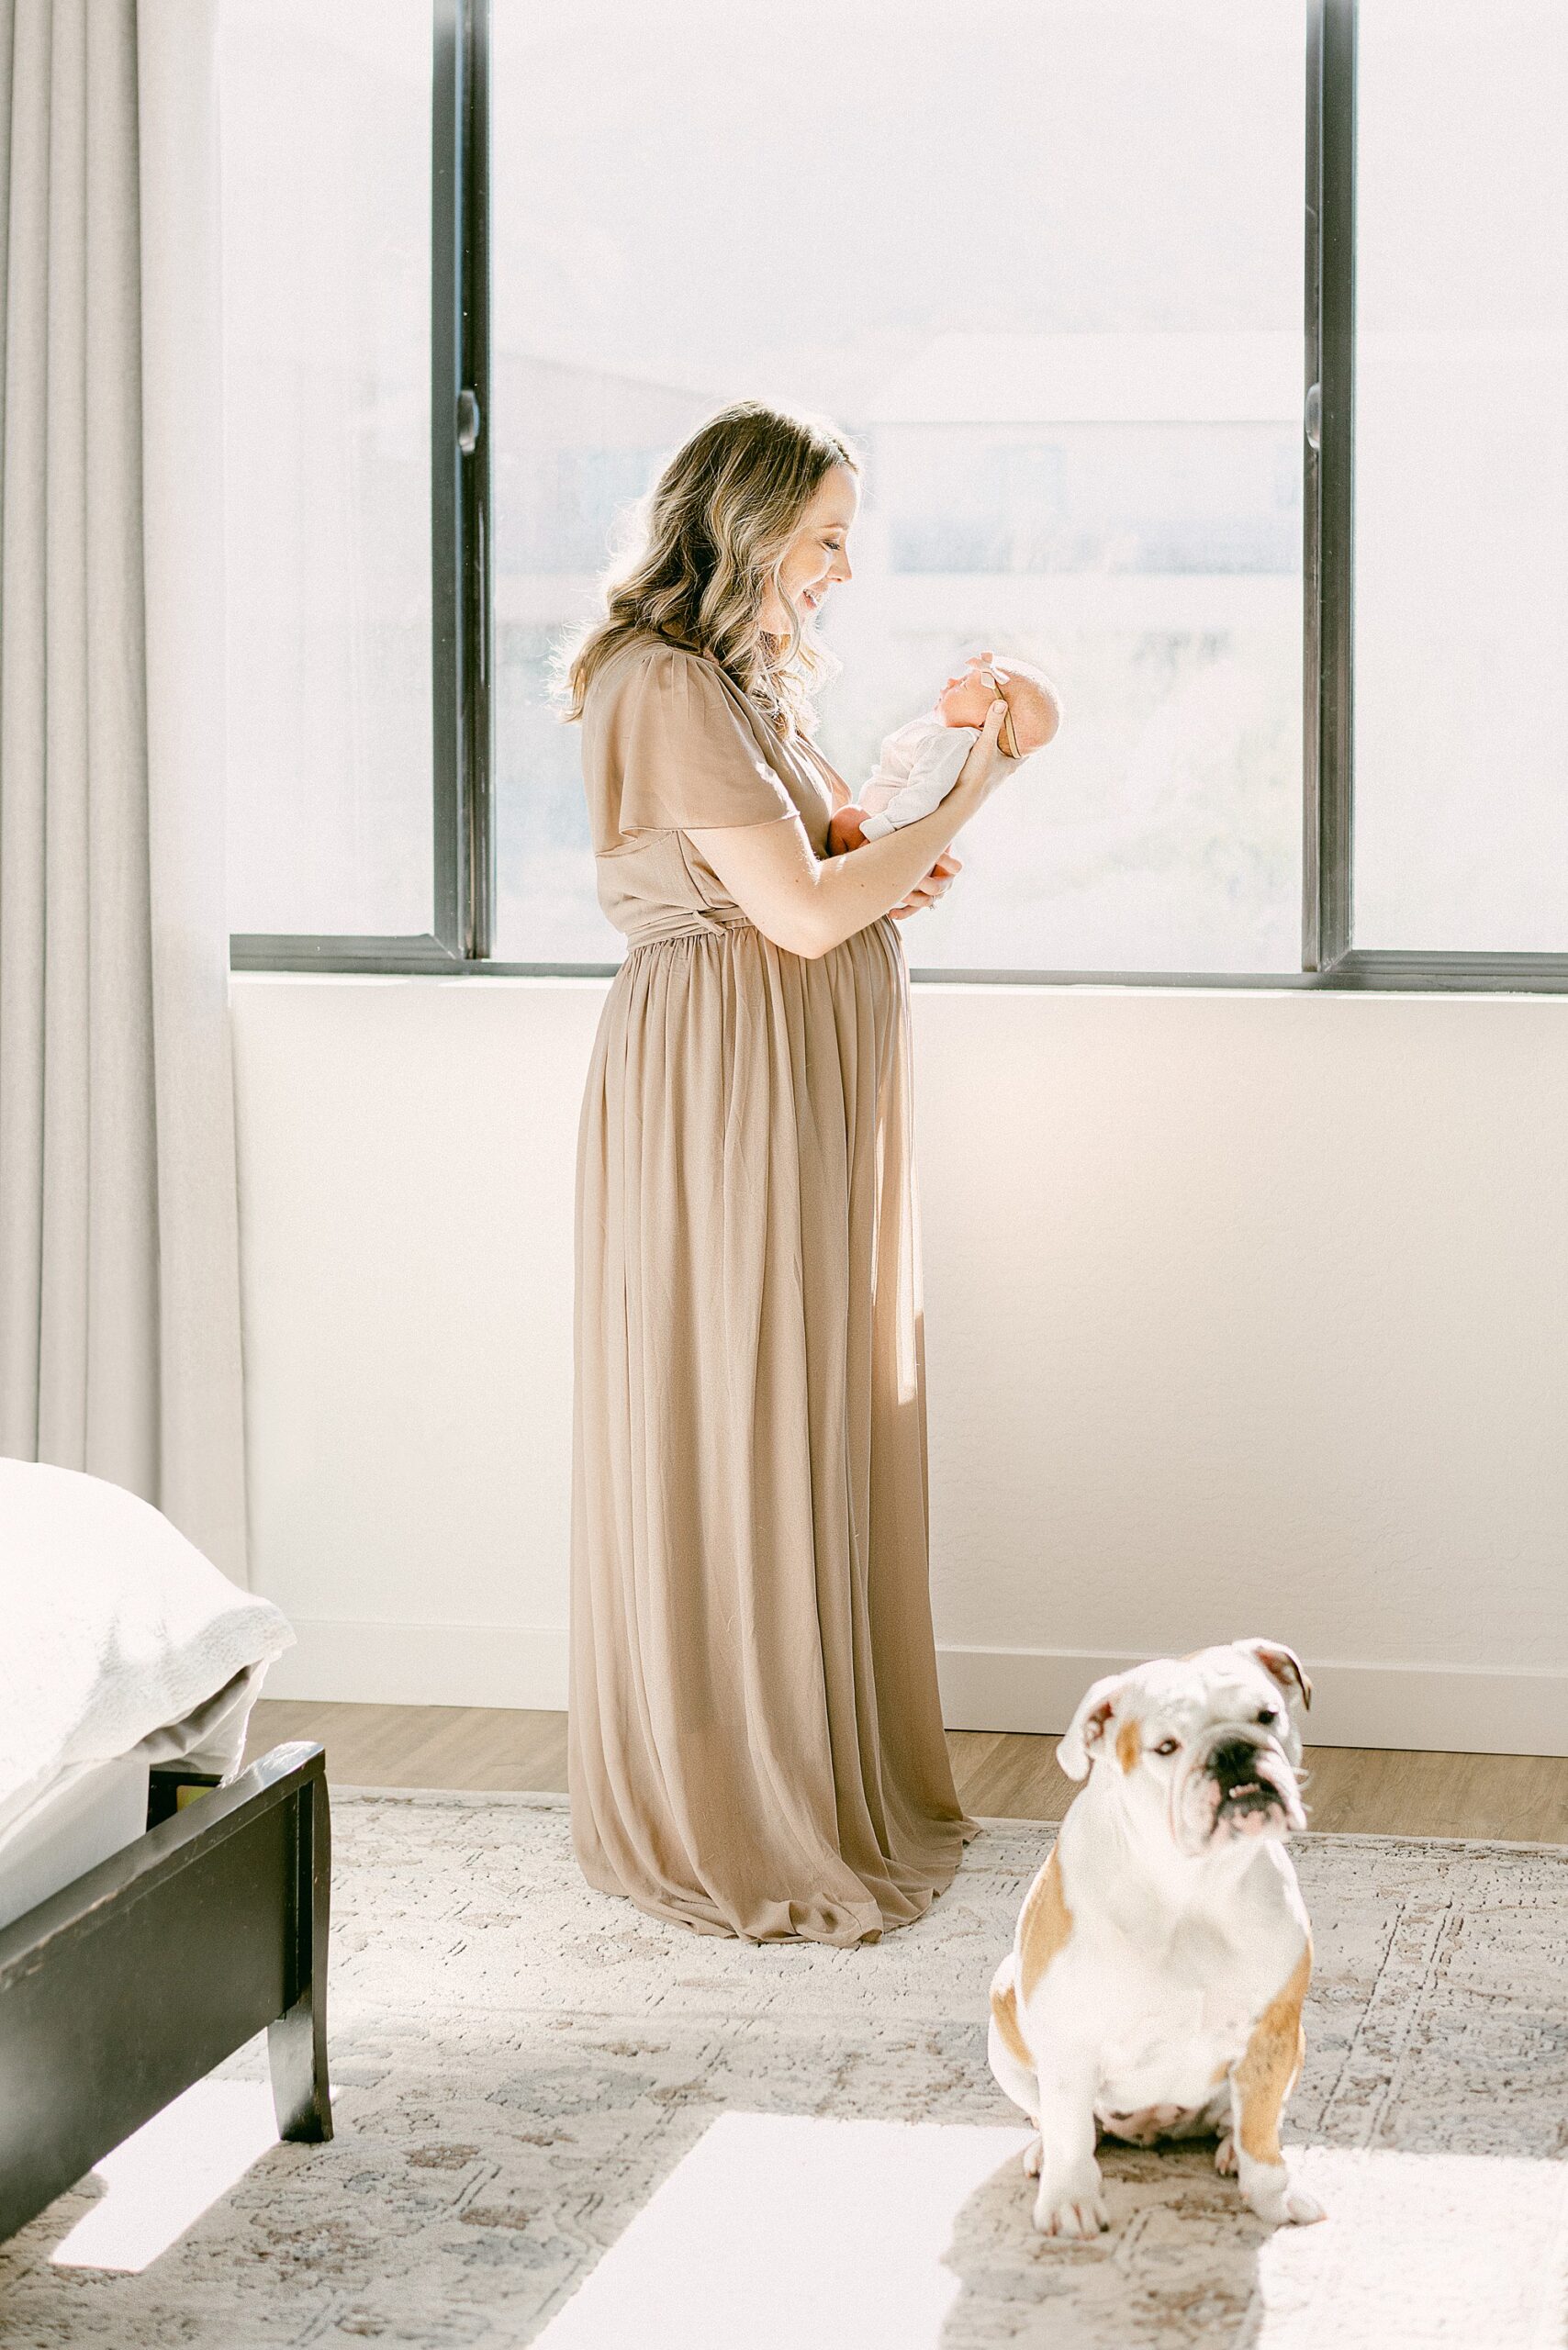 New mom wearing mauve gown standing next to window while holding newborn baby face to face. English Bulldog is sitting next to her feet while looking at camera.